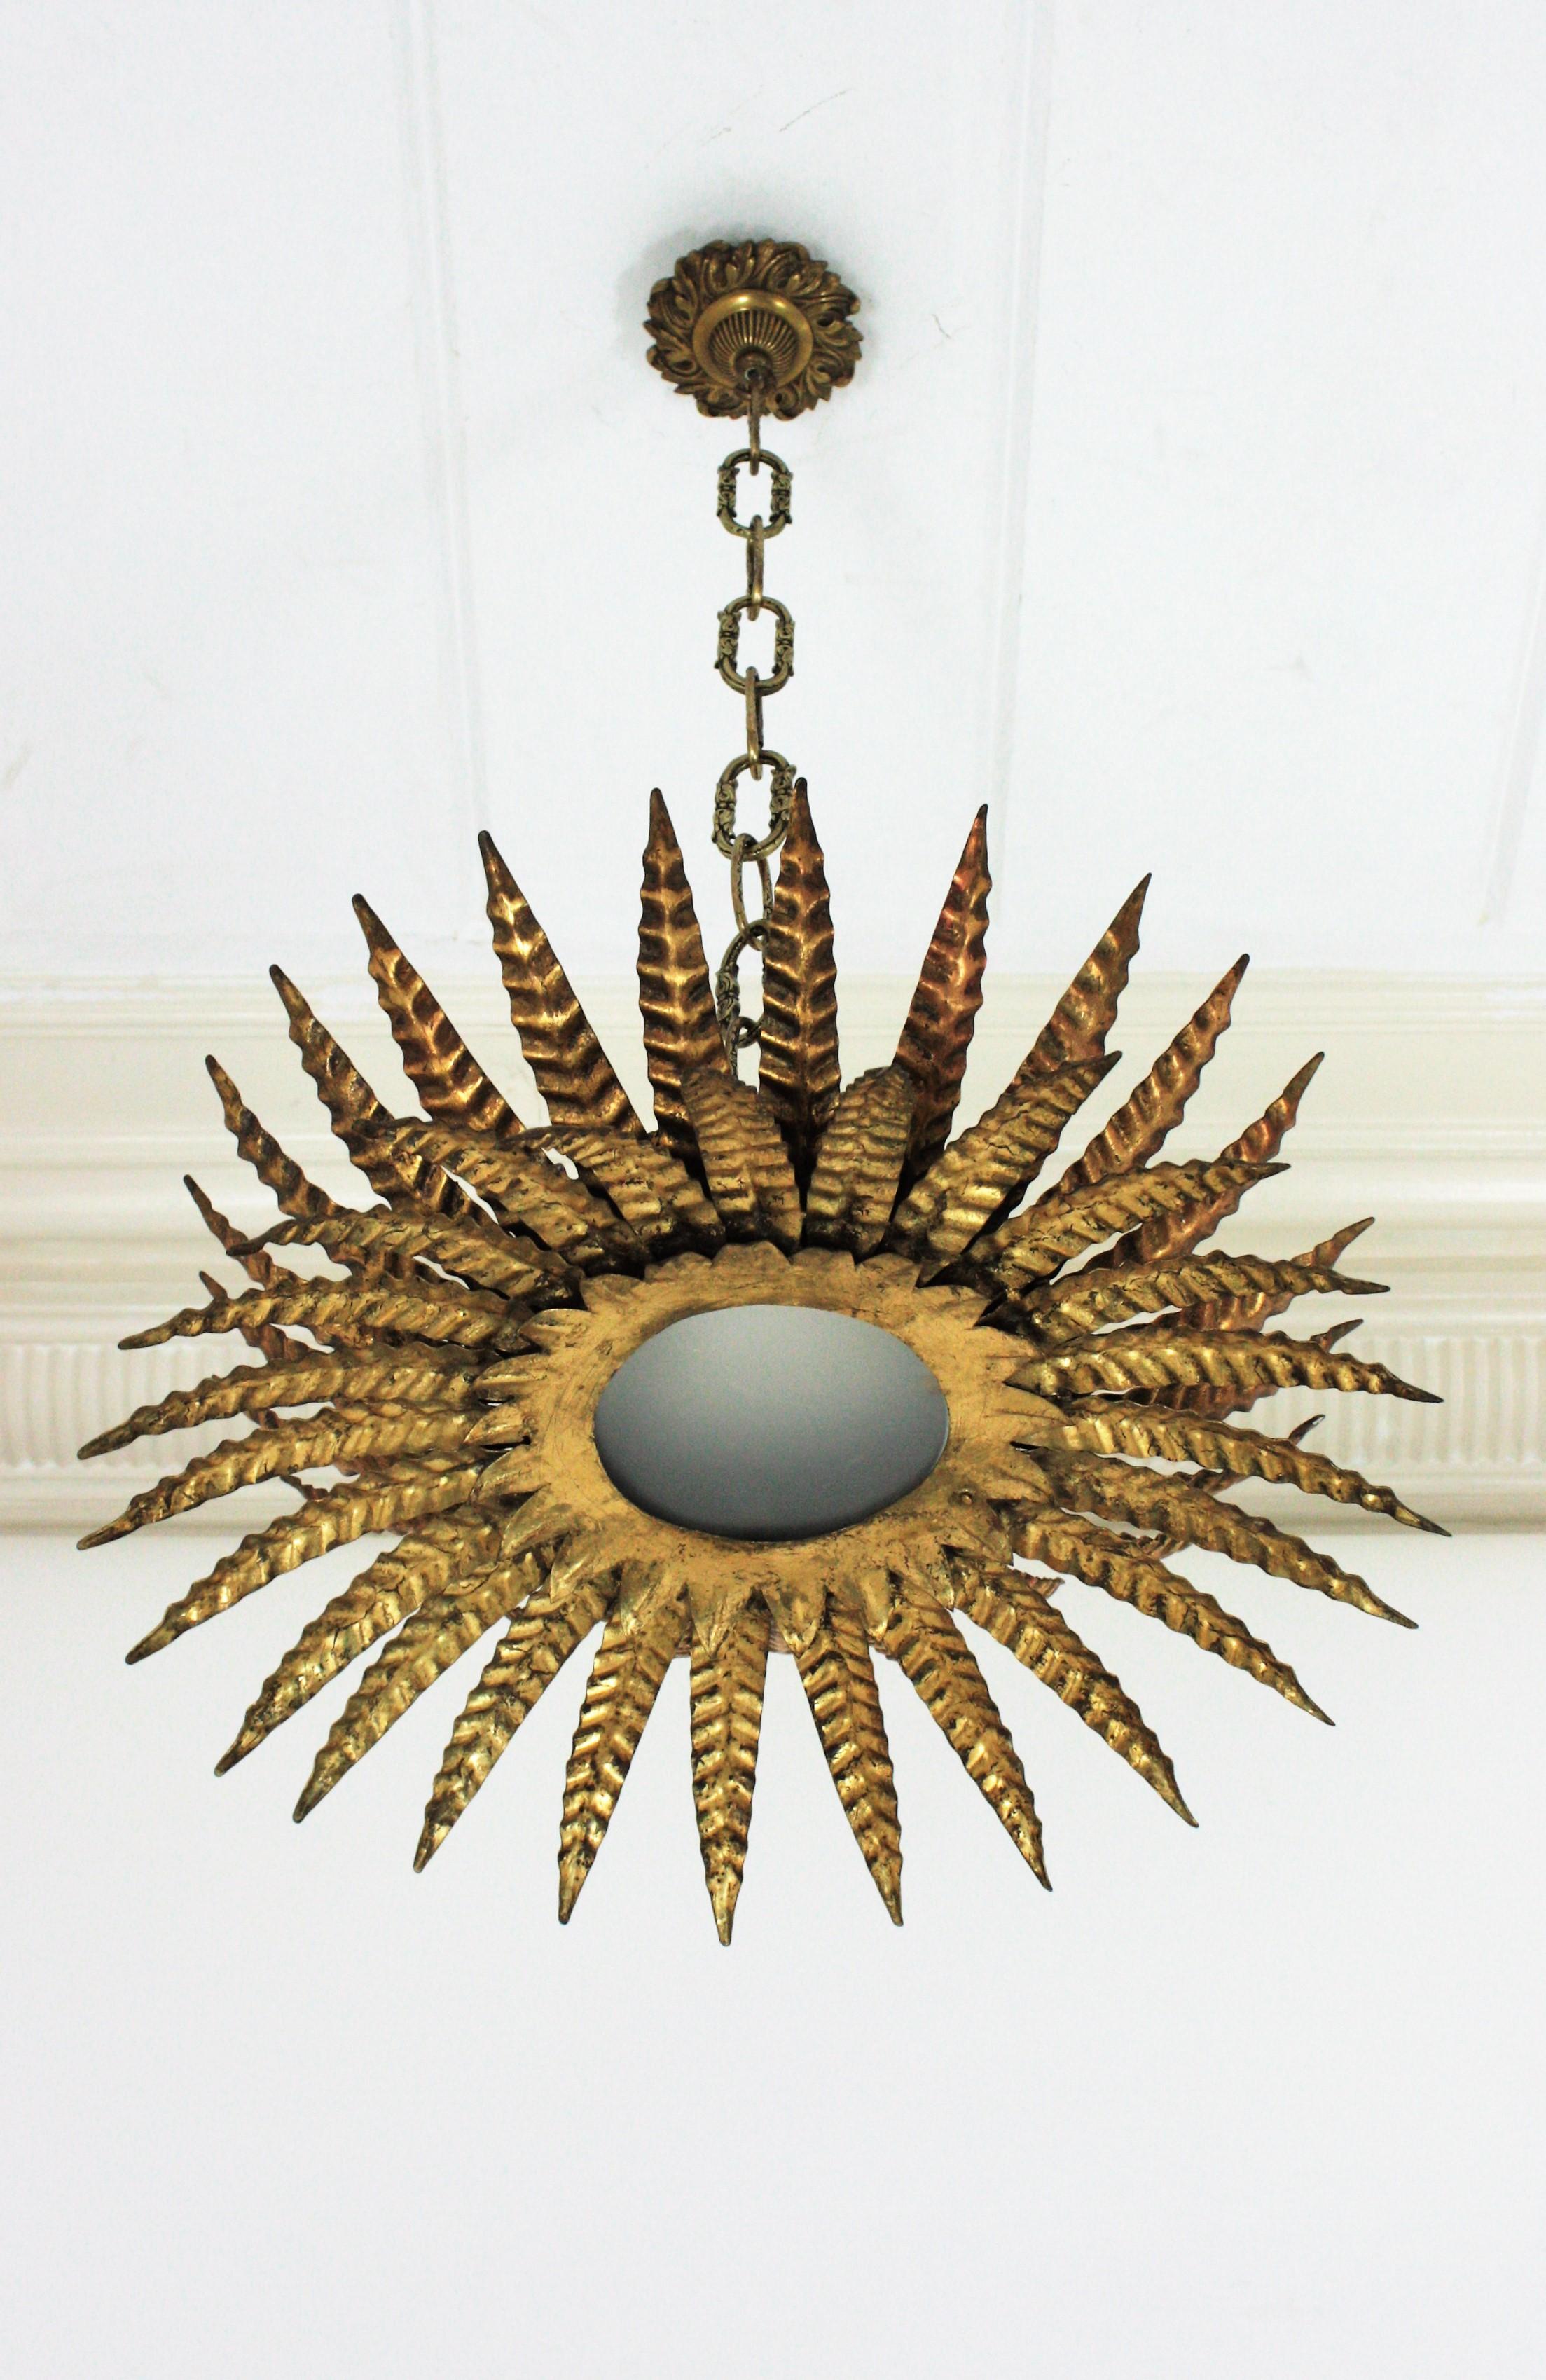 Gorgeous Brutalist gilt iron and glass sunburst flush mount ceiling lamp or chandelier. France, 1950s.
This sunburst light fixture features a triple layer of leaves / rays surrounding a central frosted glass panel. Each layer has rays in different